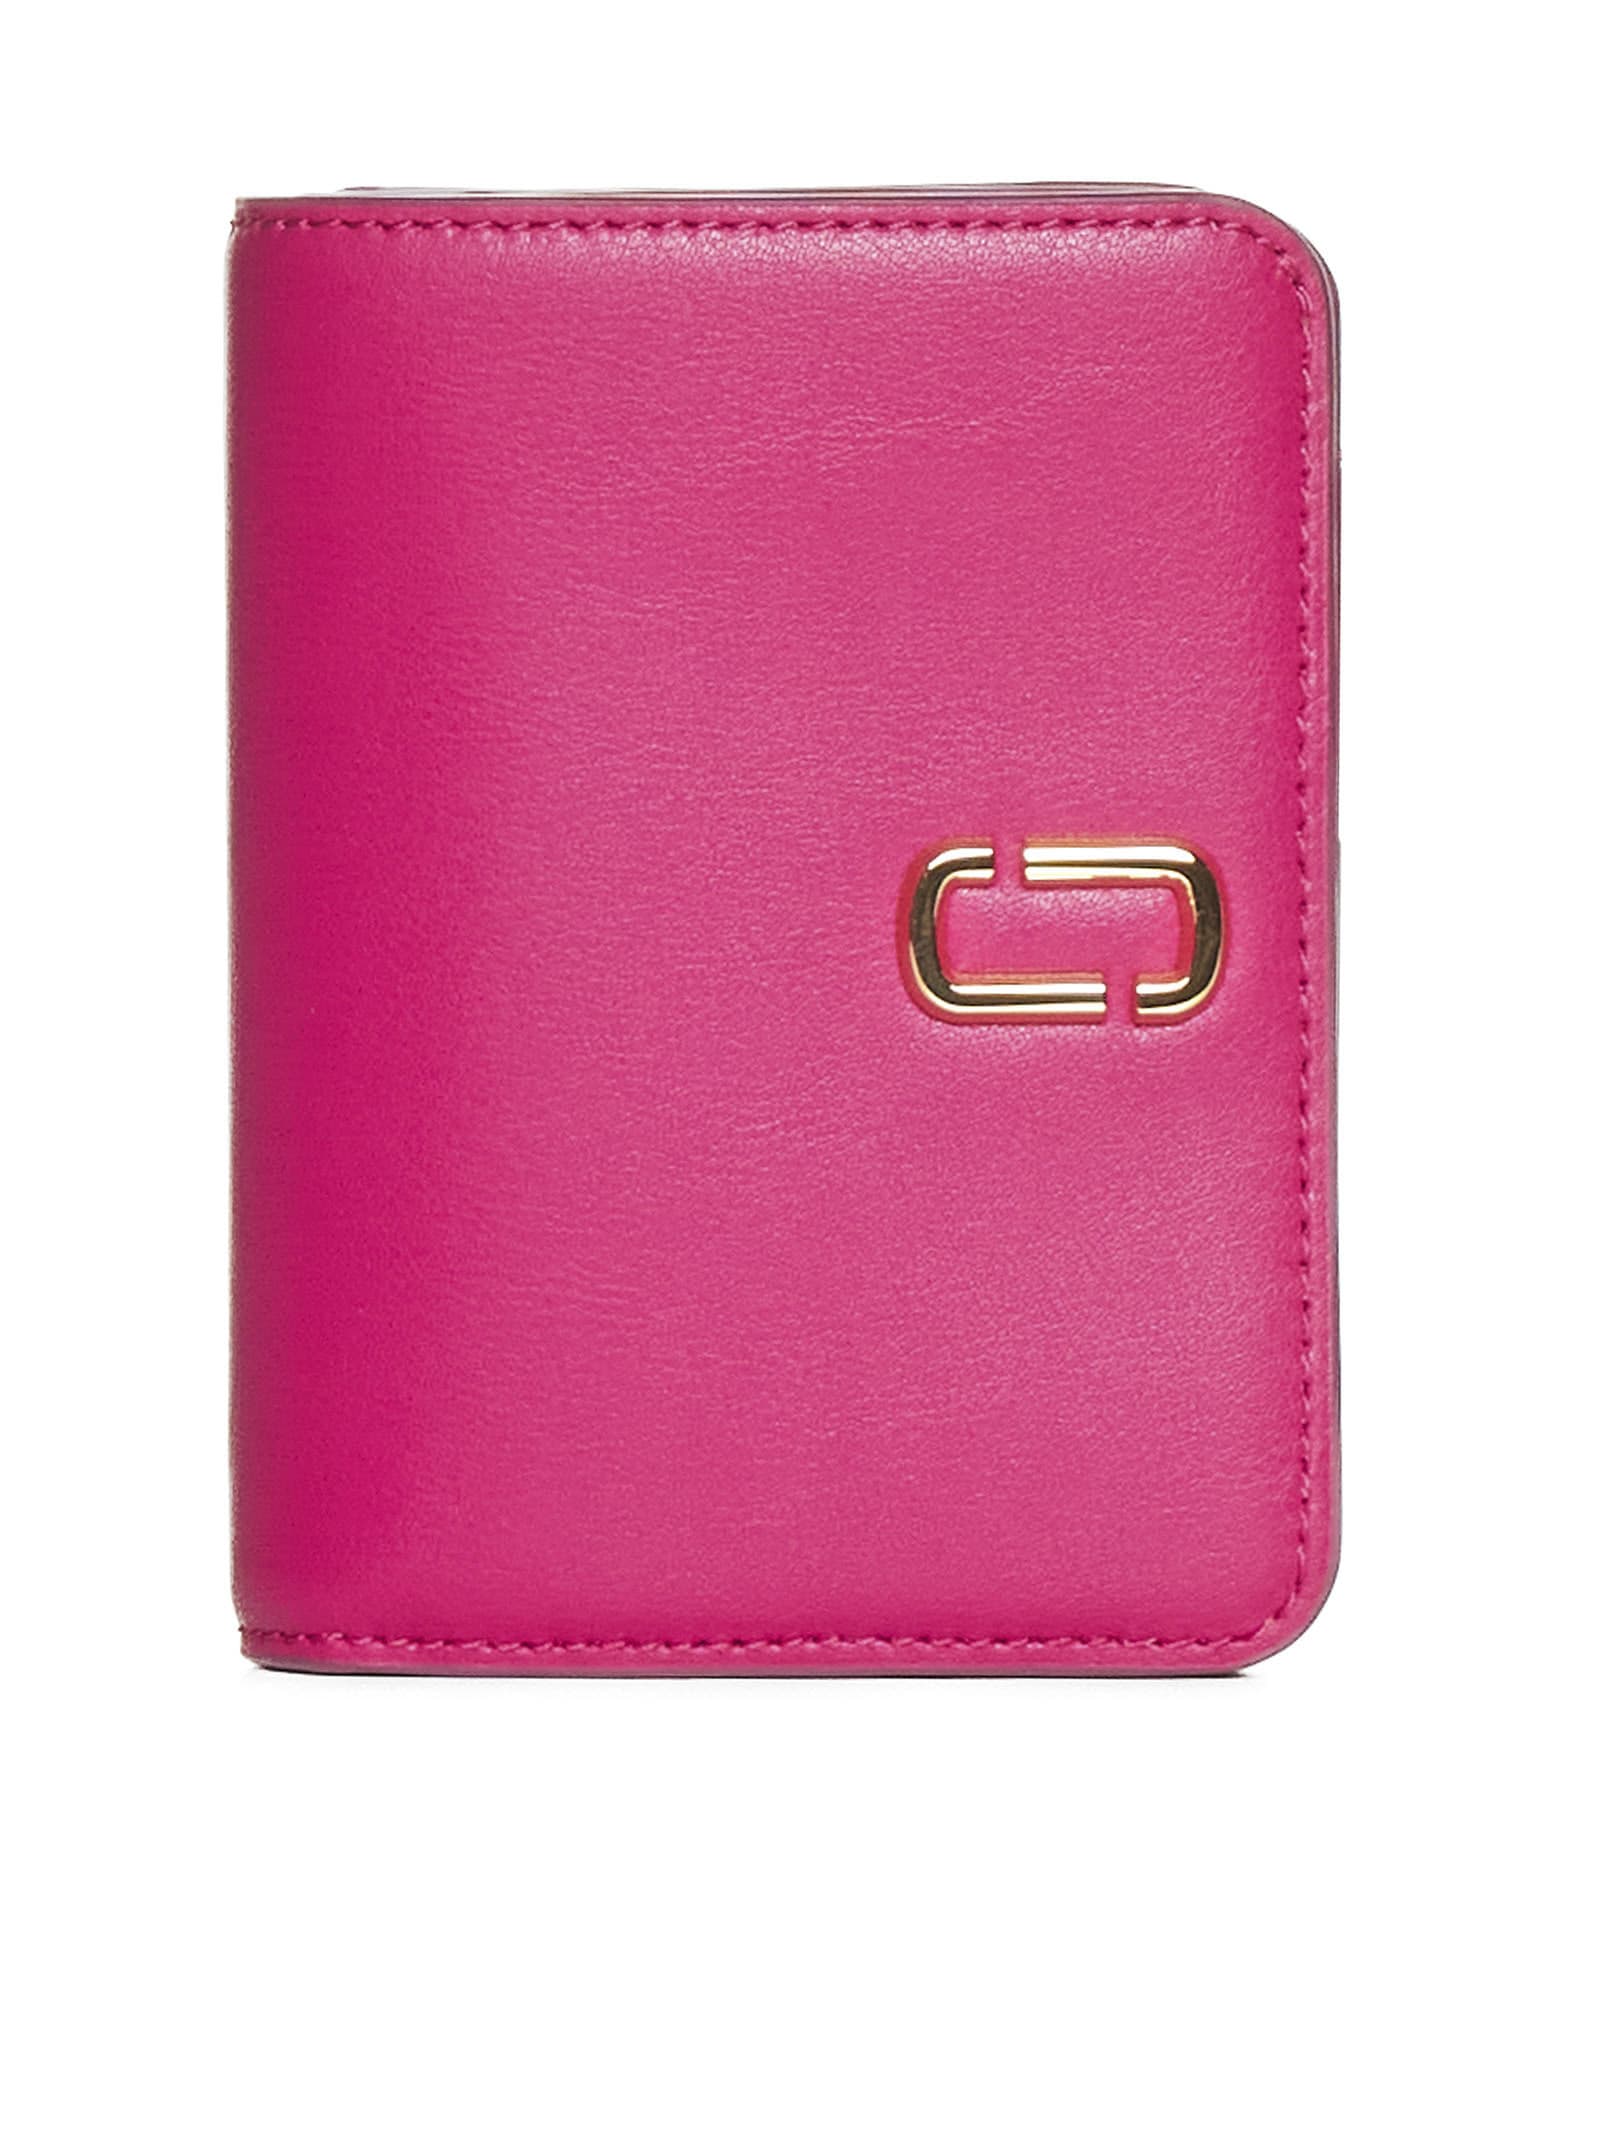 Marc Jacobs Wallet In Lipstick Pink